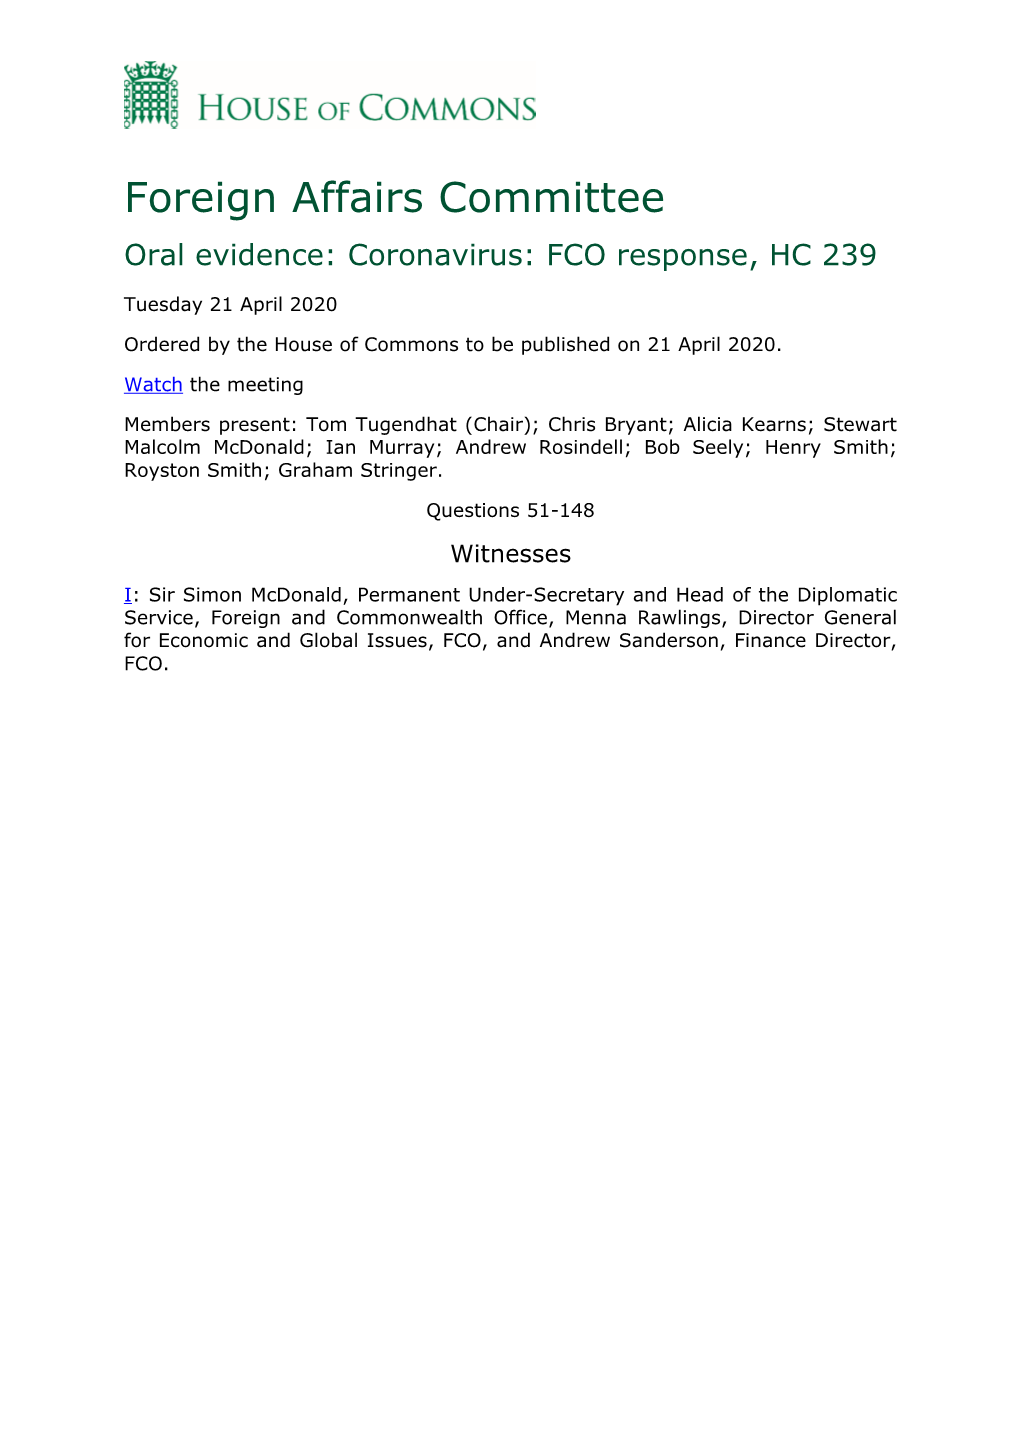 Foreign Affairs Committee Oral Evidence: Coronavirus: FCO Response, HC 239